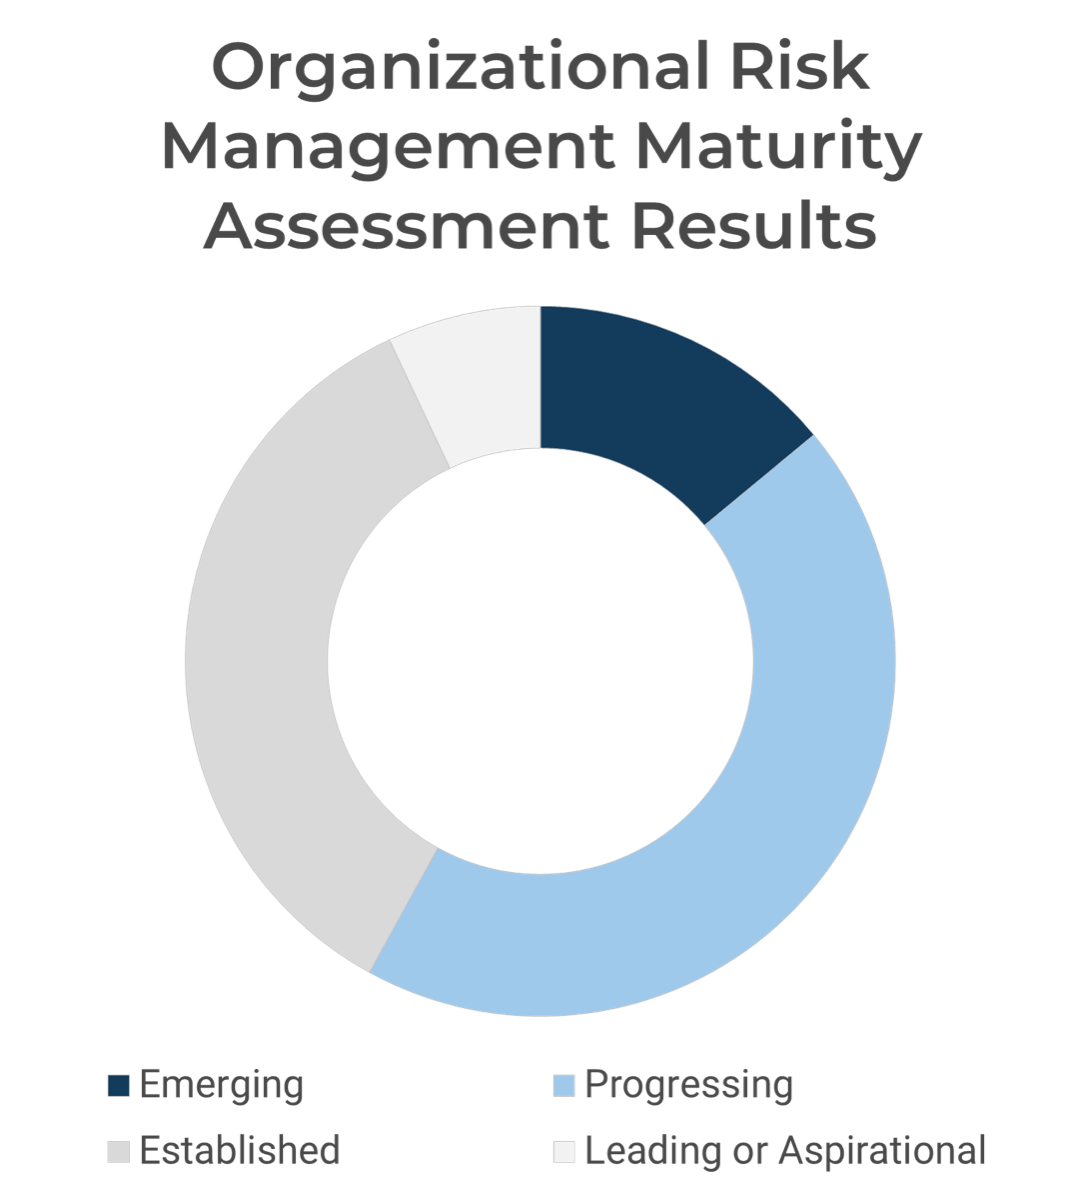 Pie chart titled 'Organizational Risk Management Maturity Assessment Results' showing just under half 'Progressing', a third 'Established', a seventh 'Emerging', and a very small portion 'Leading or Aspirational'.